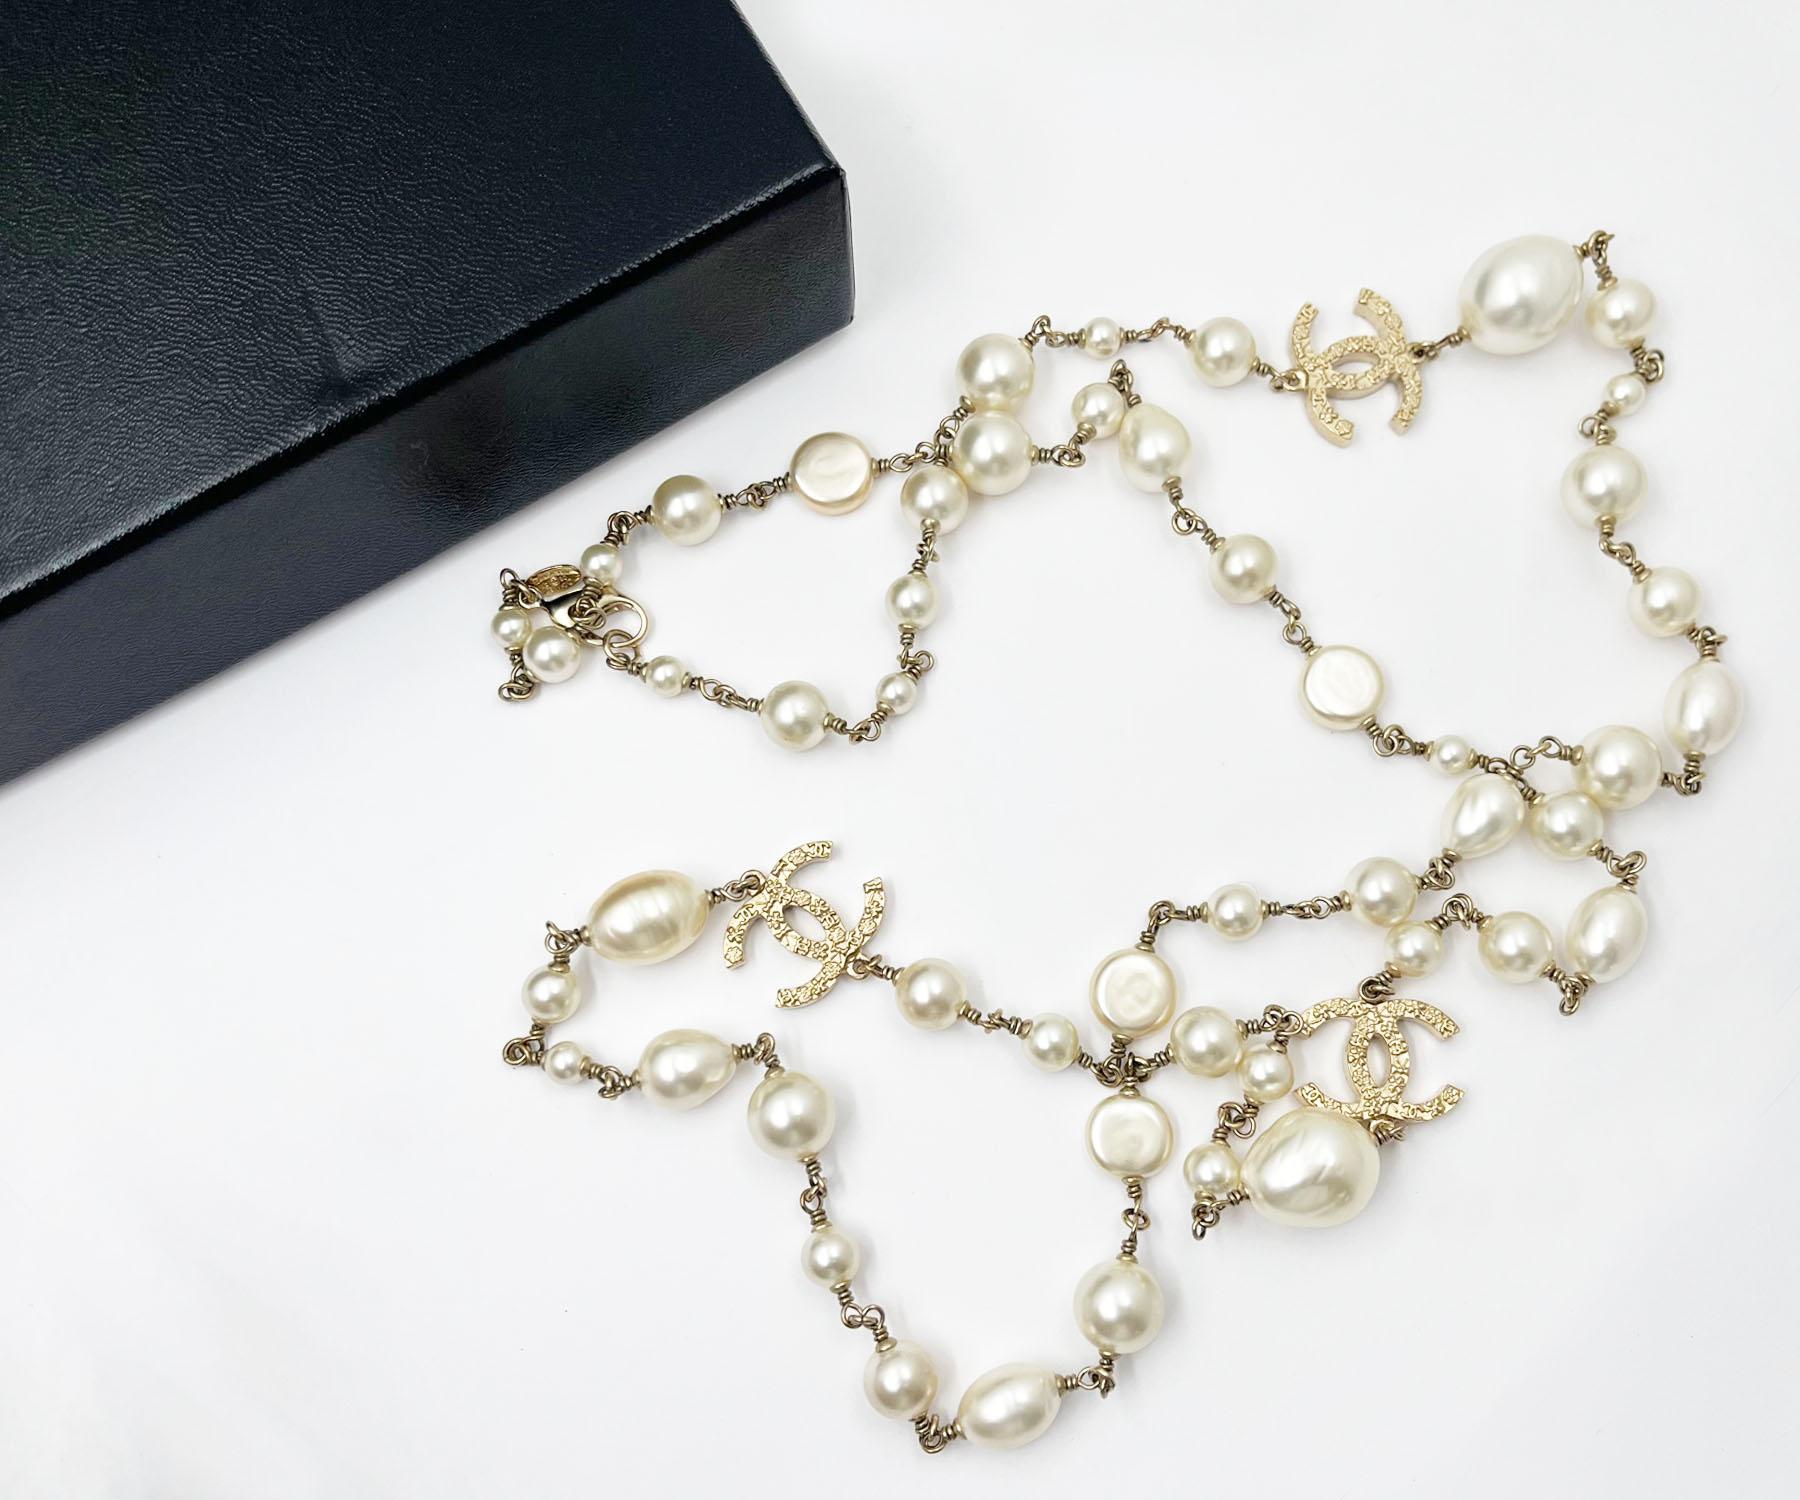 Chanel Gold Textured CC Faux Baroque Pearl Necklace

*Marked 08
*Made in France
*Comes with the original box

-It is approximately 46